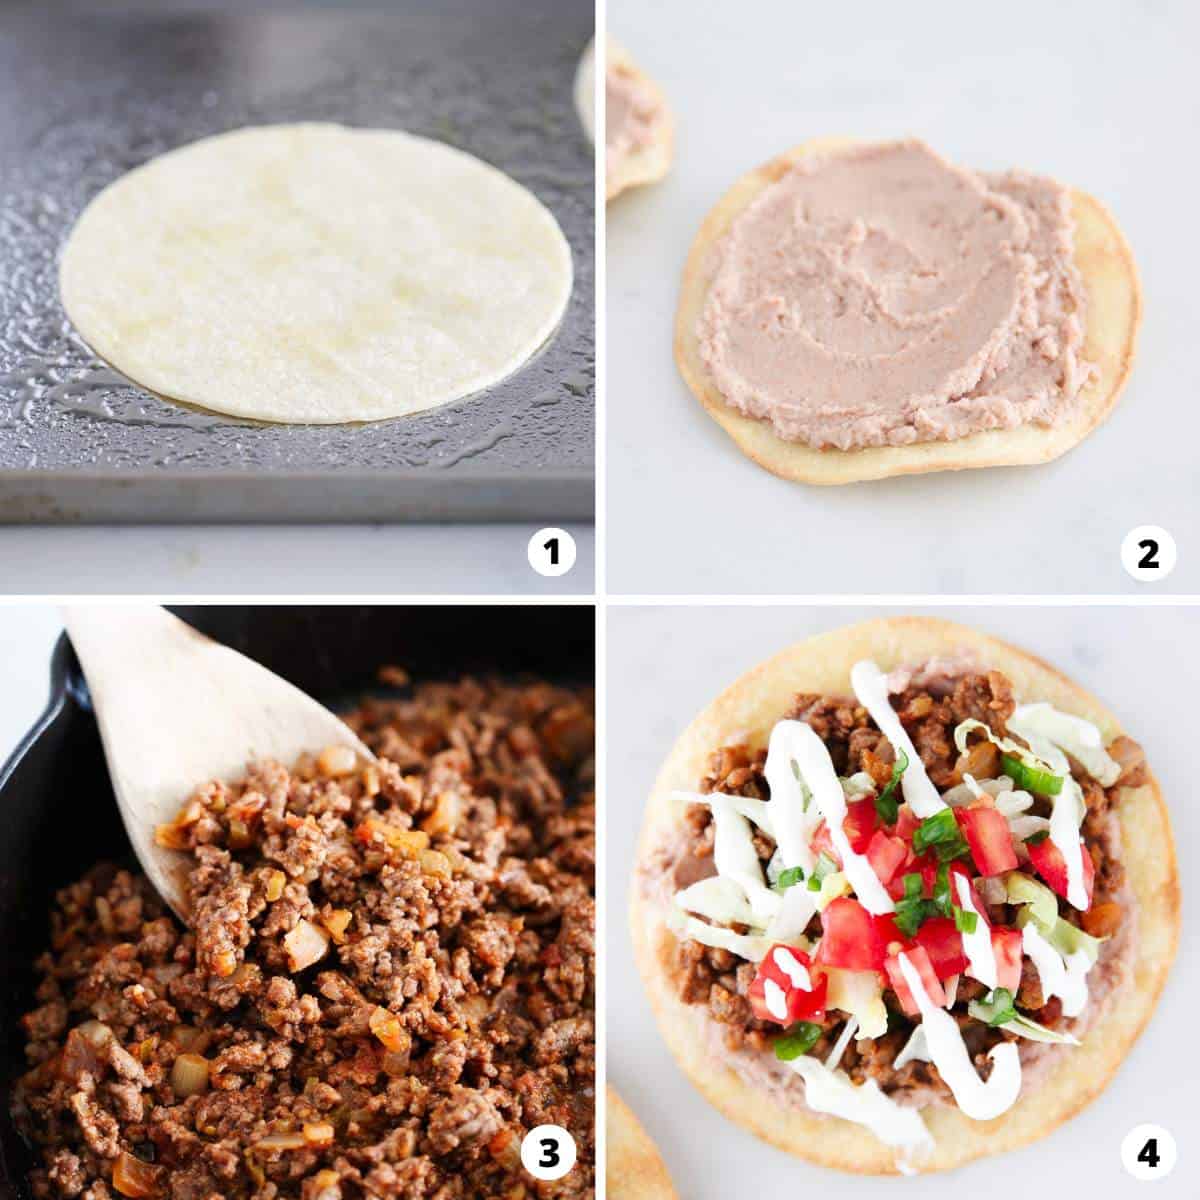 Showing how to make tostadas in a 4 step collage.